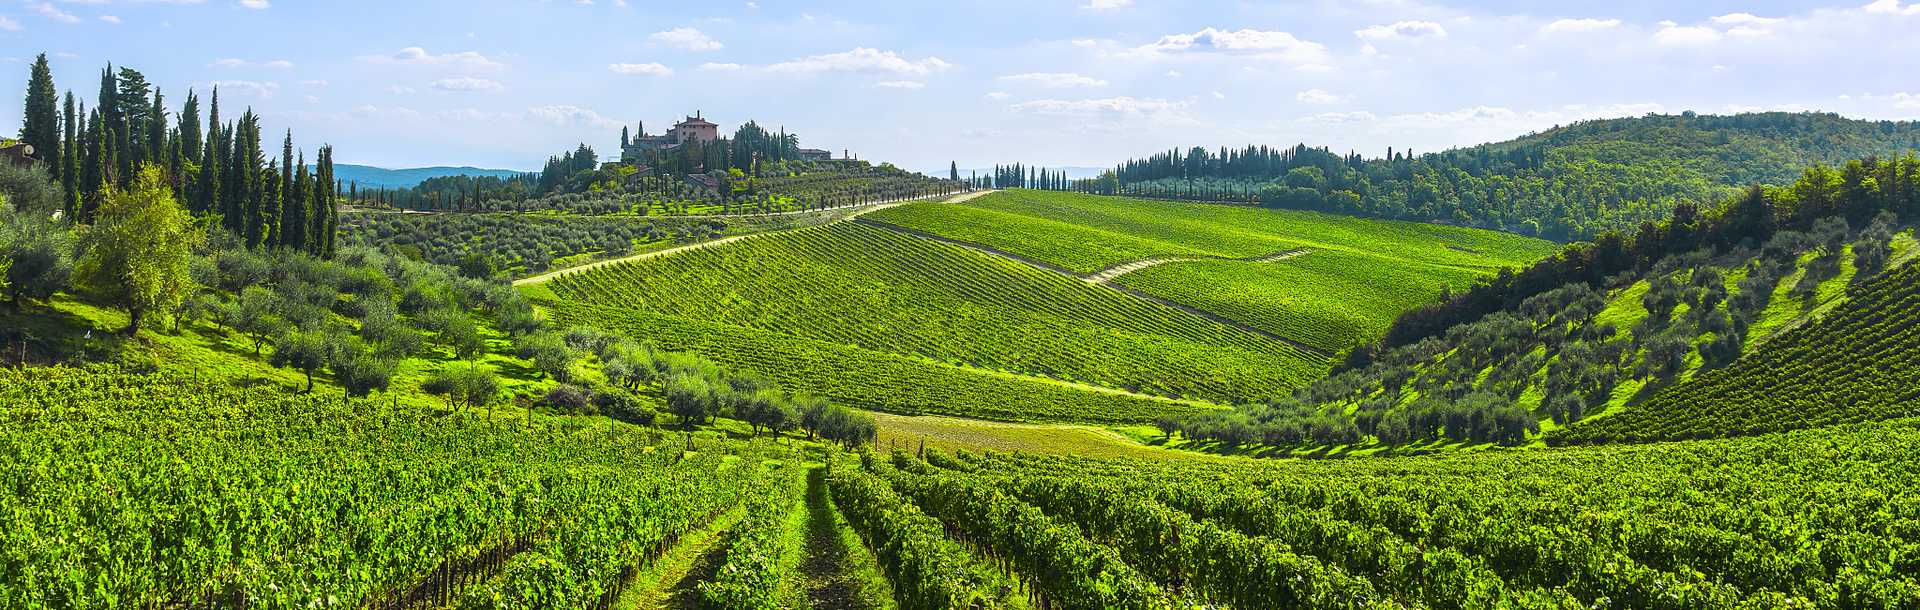 Vineyards on the rolling hills in Chianti, Italy